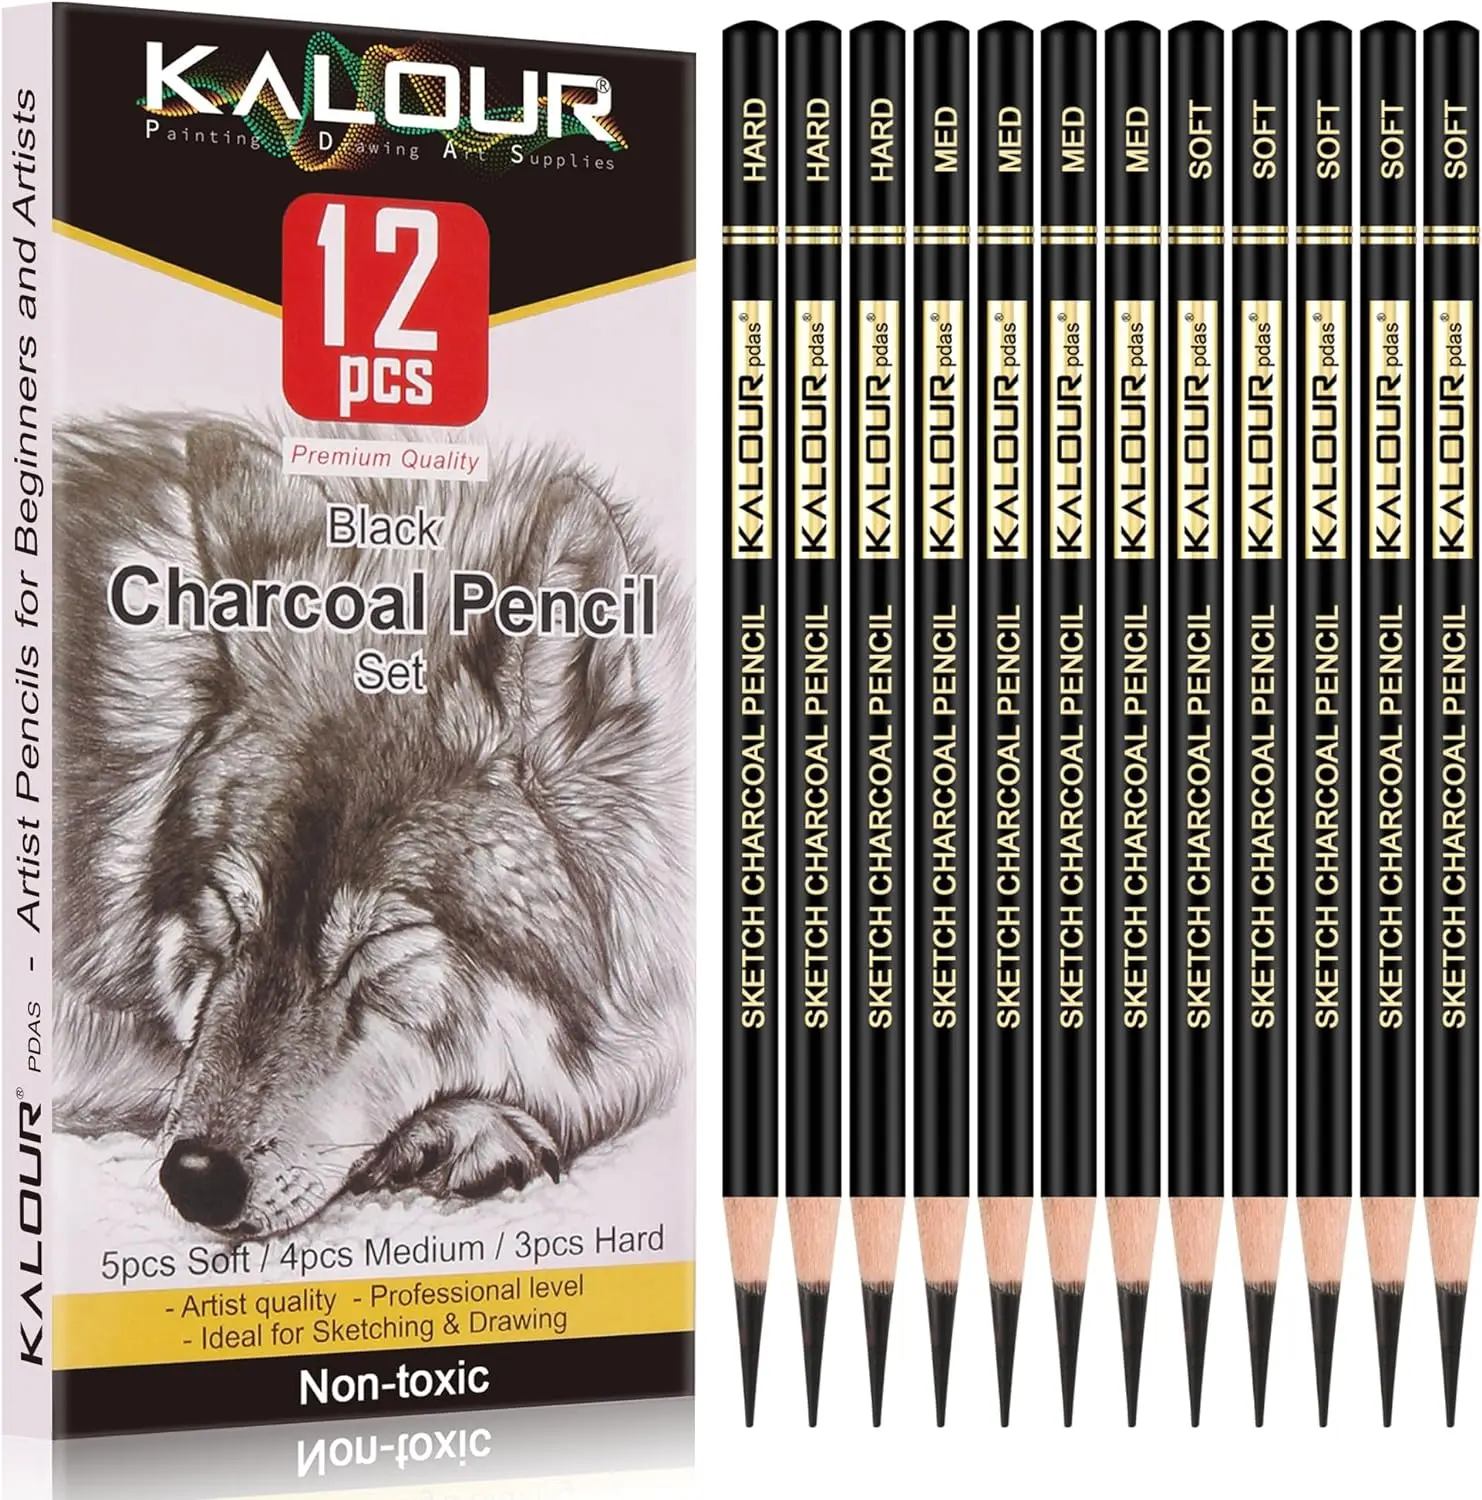 Professional Charcoal Pencils Drawing Set -12 Pieces Soft, Medium and Hard Charcoal Pencils for Drawing, Sketching, Shading, Art 3pcs set art sketch compressed charcoal bars sticks rods 10x10x65mm soft medium hard artist drawing for details processing